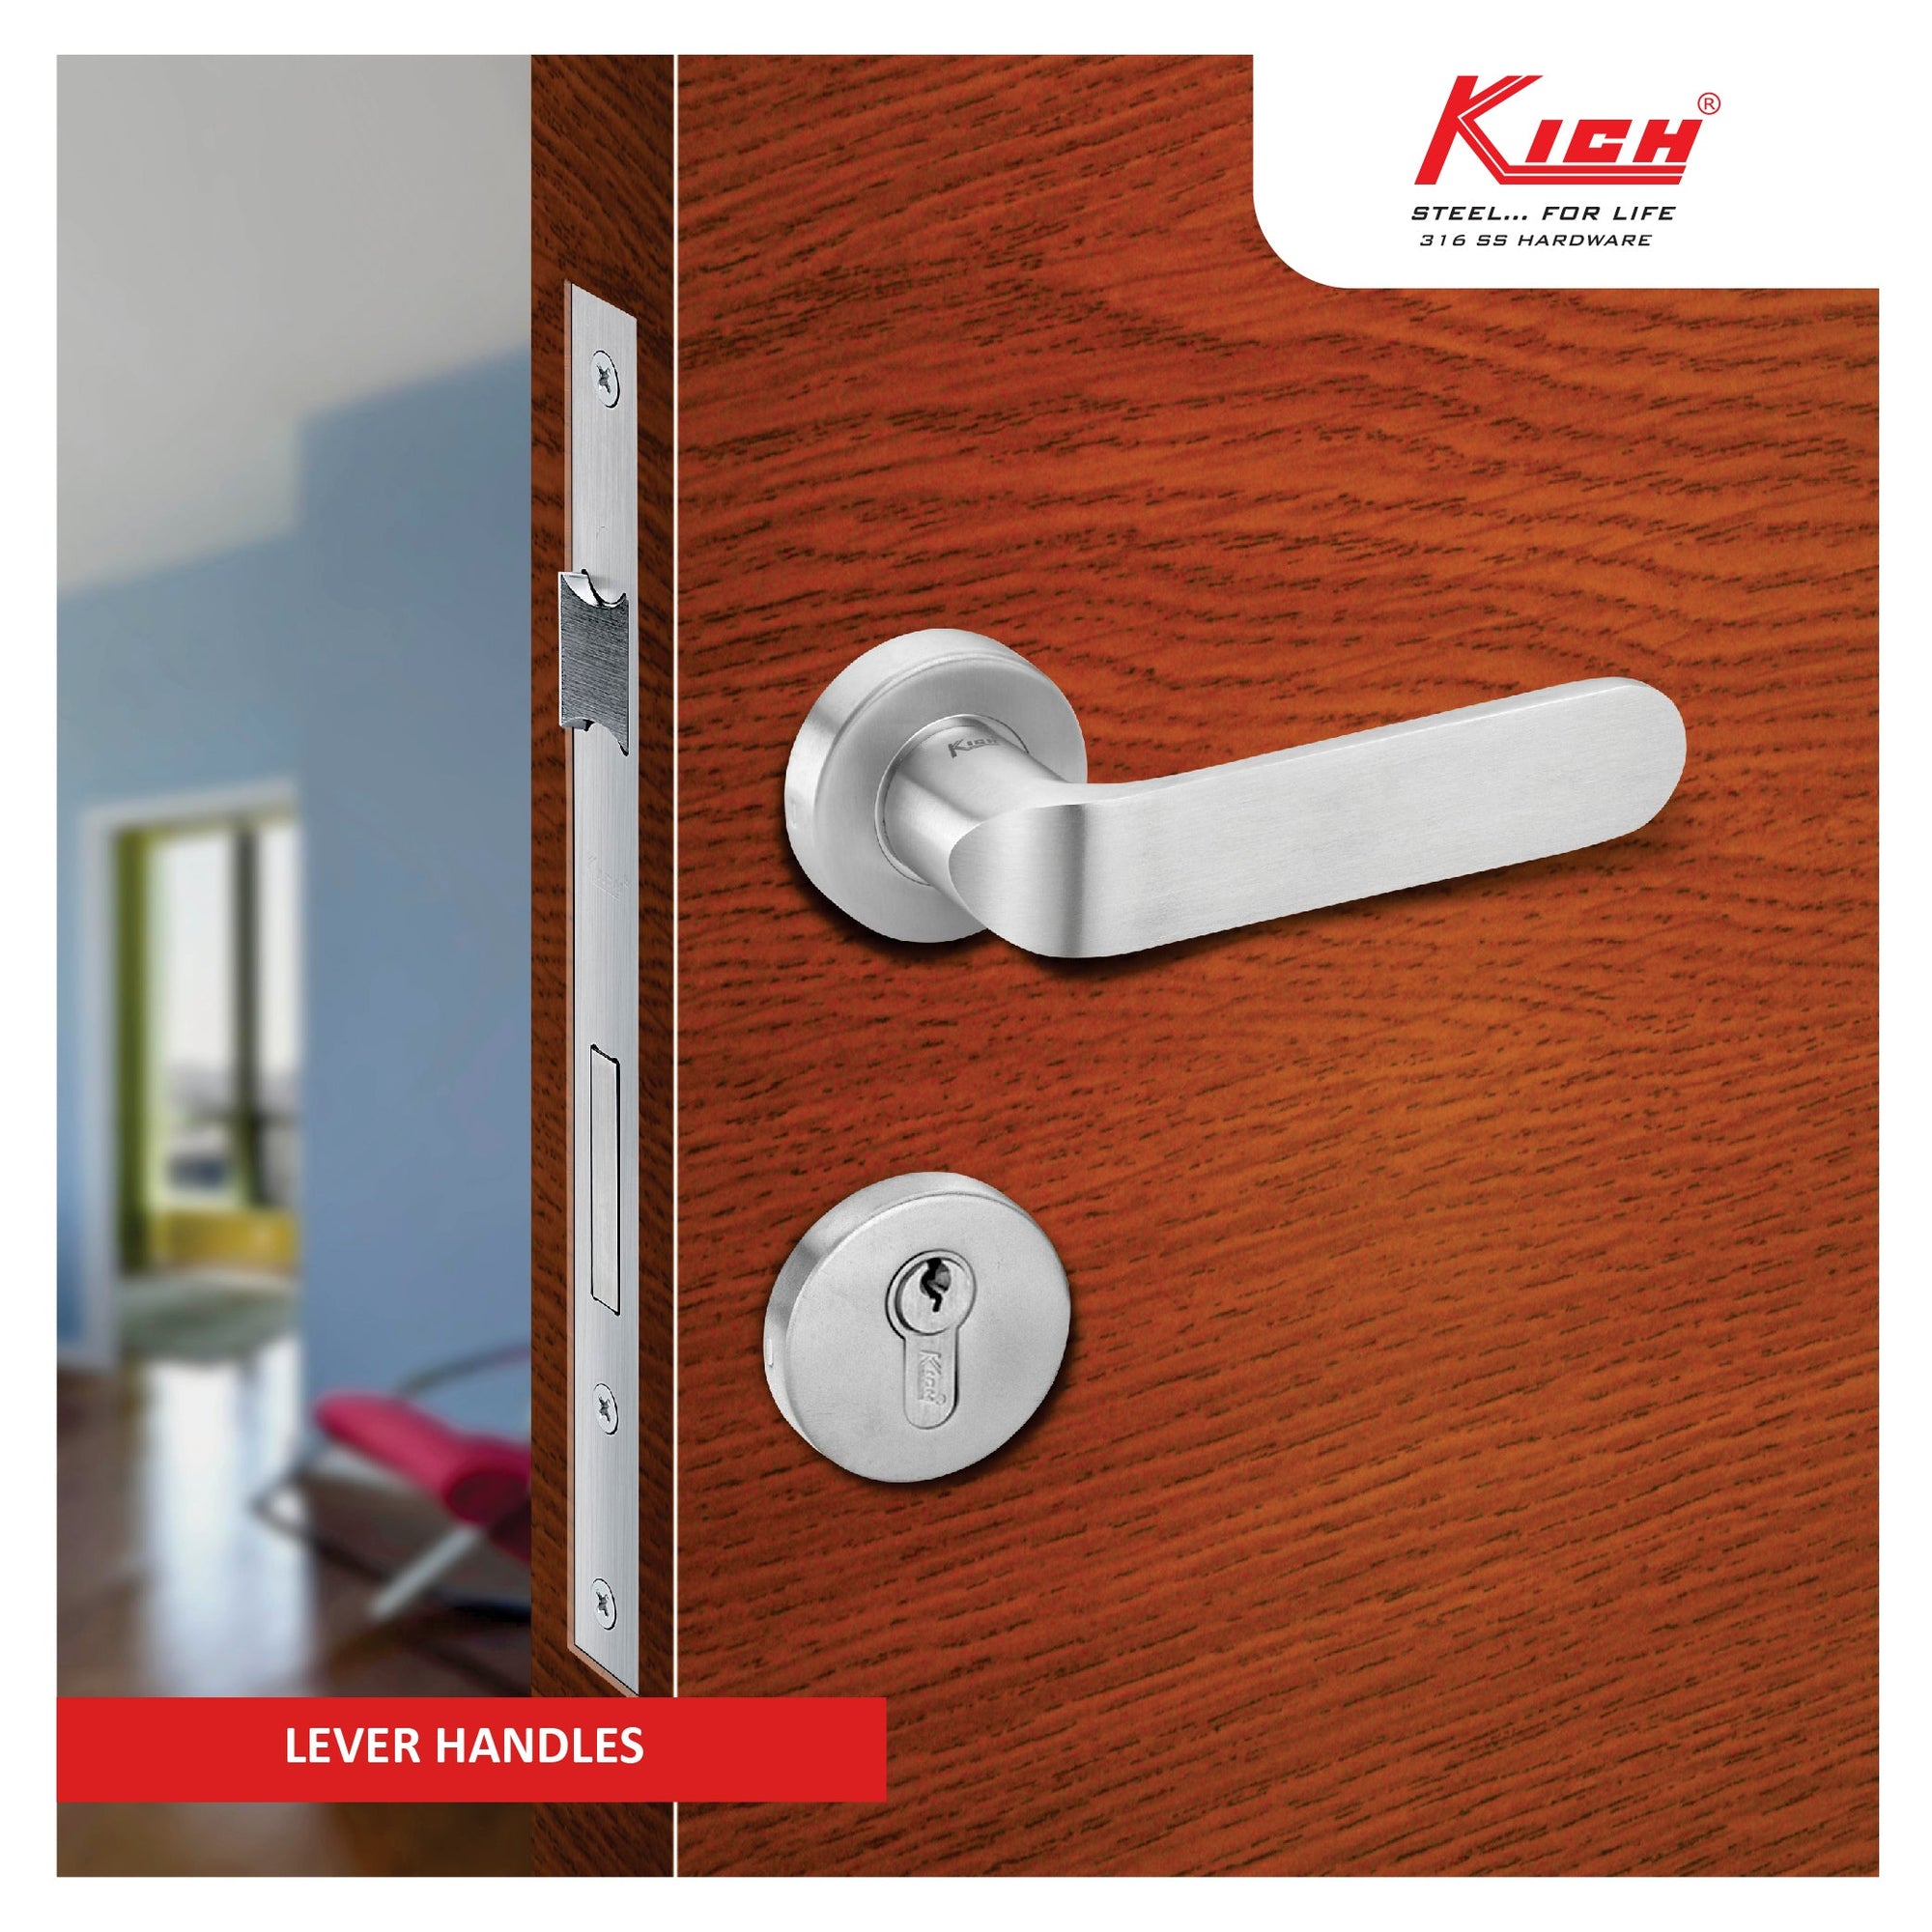 Elegant Kich Lever Handles by M. M. Noorbhoy & Co - High-quality handles for a refined touch to your doors and cabinets.